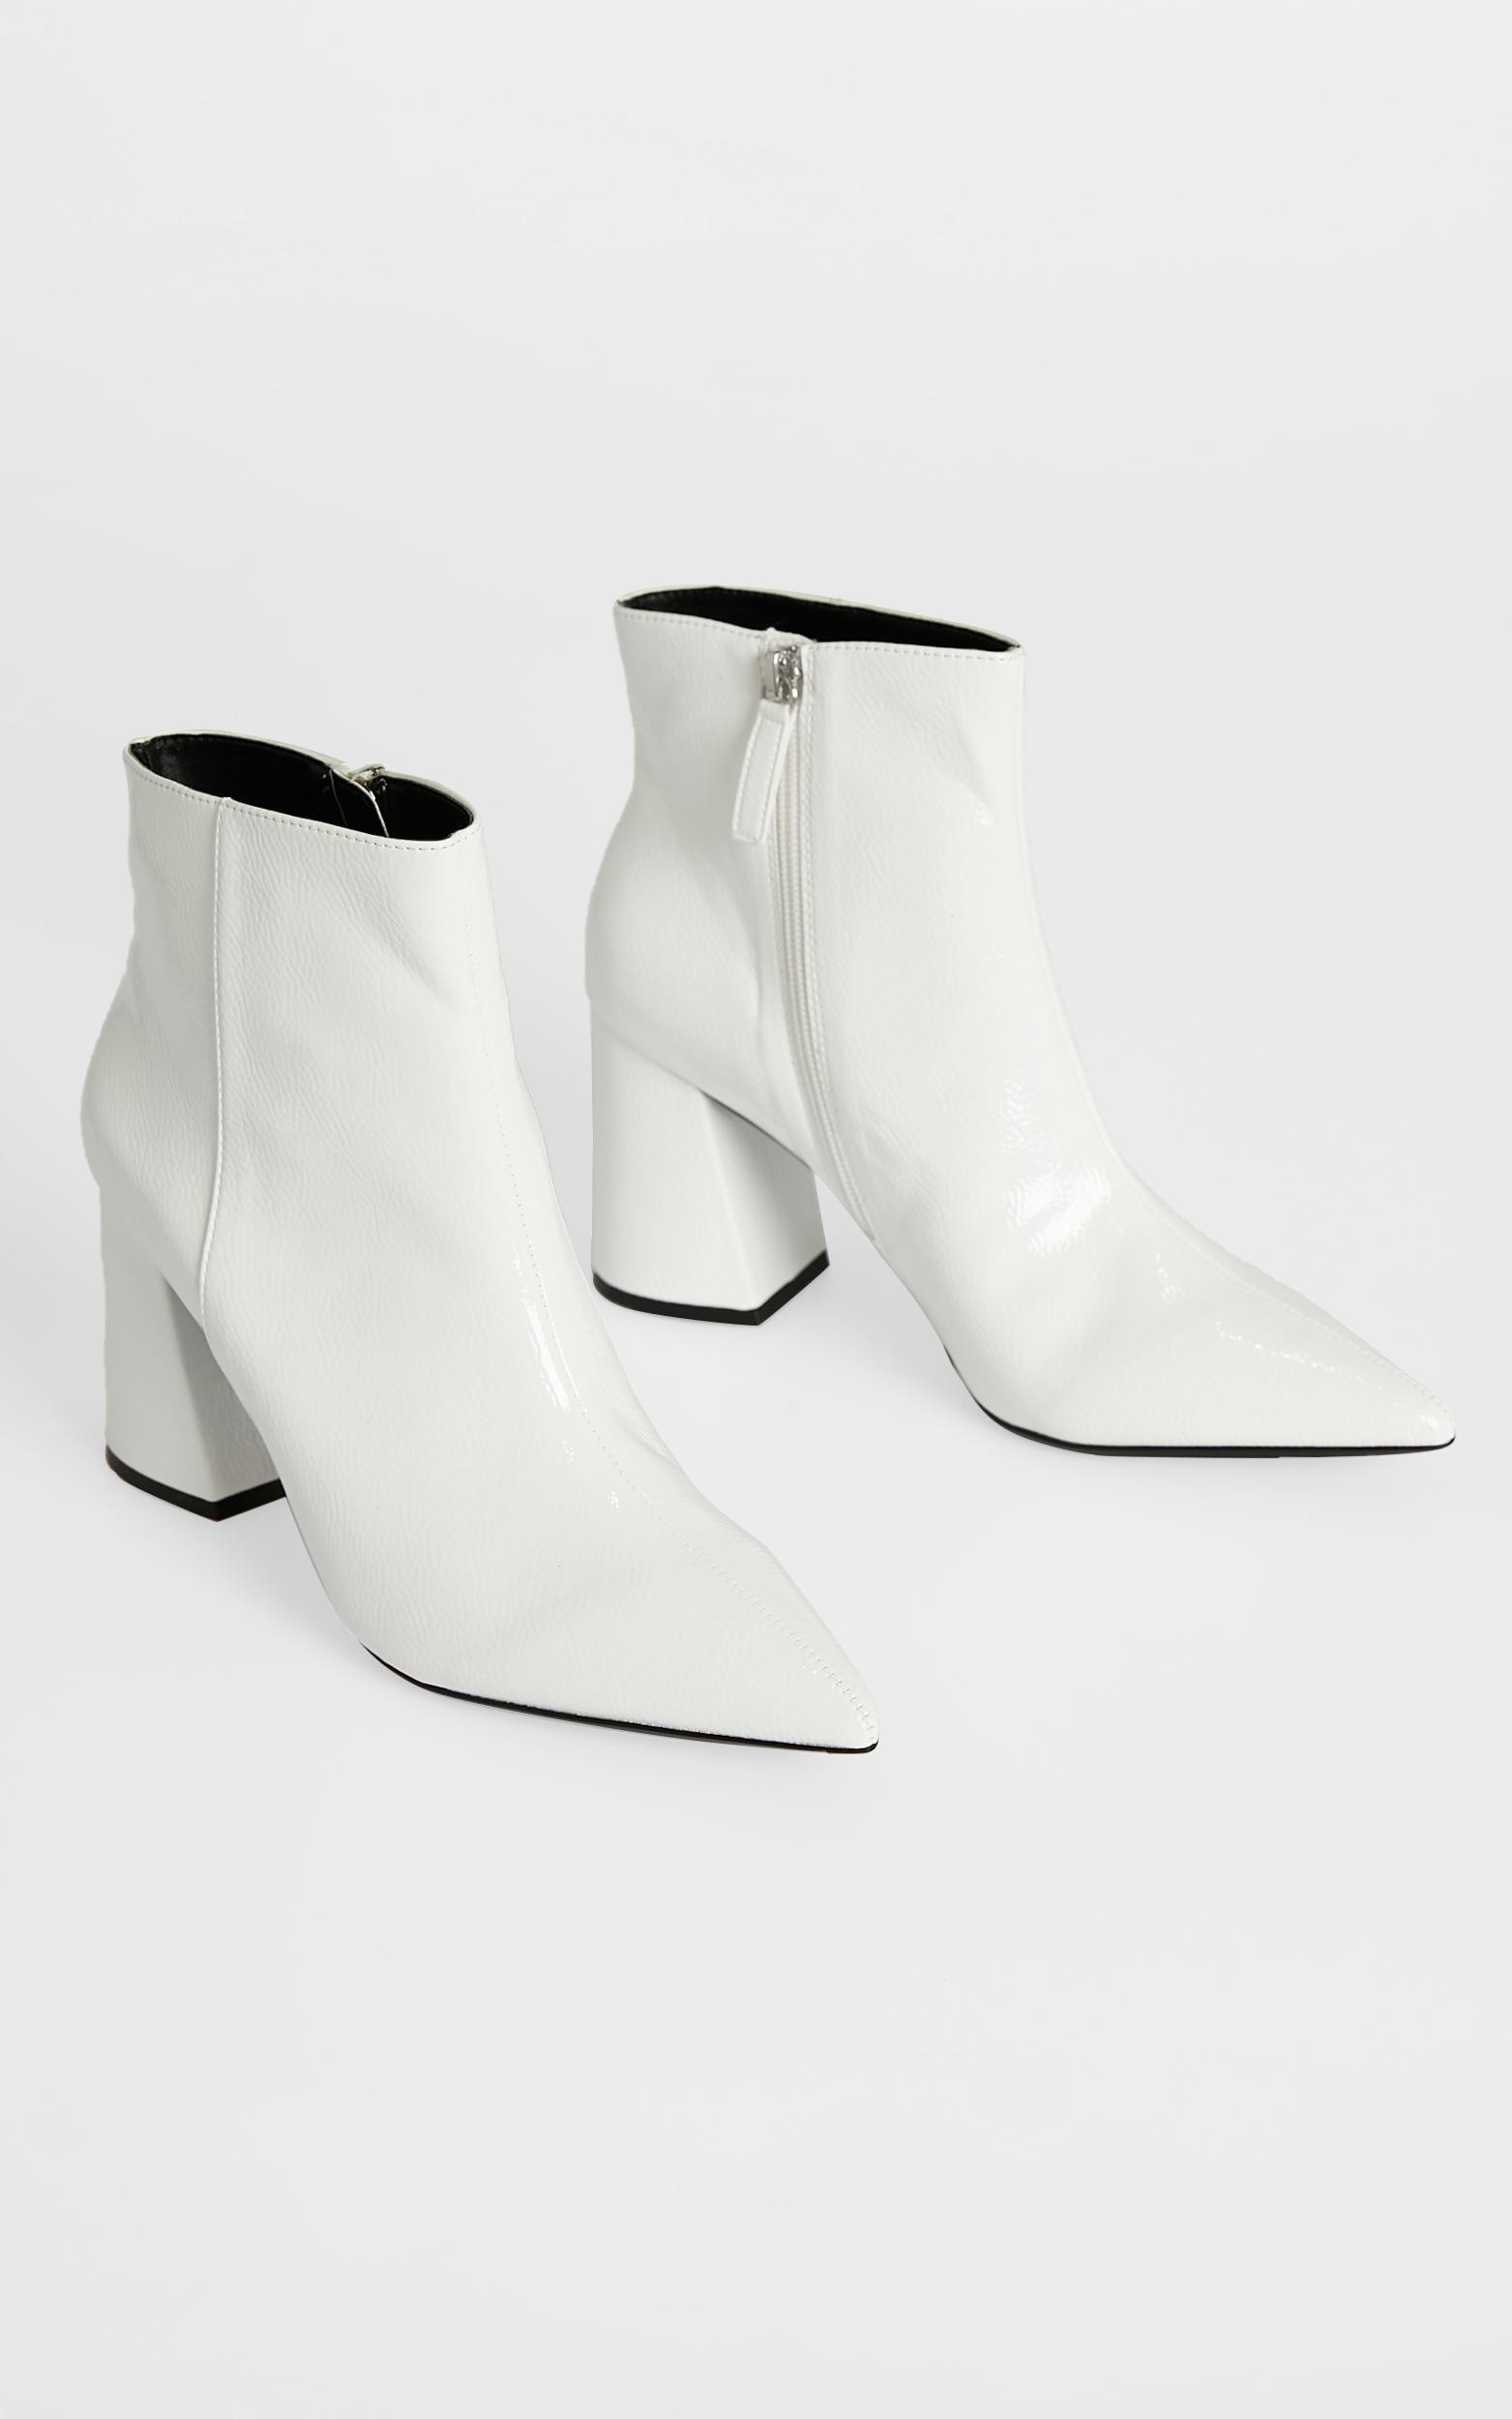 Therapy - Cleo Boots in White Crinkle Patent - 05, WHT3, hi-res image number null